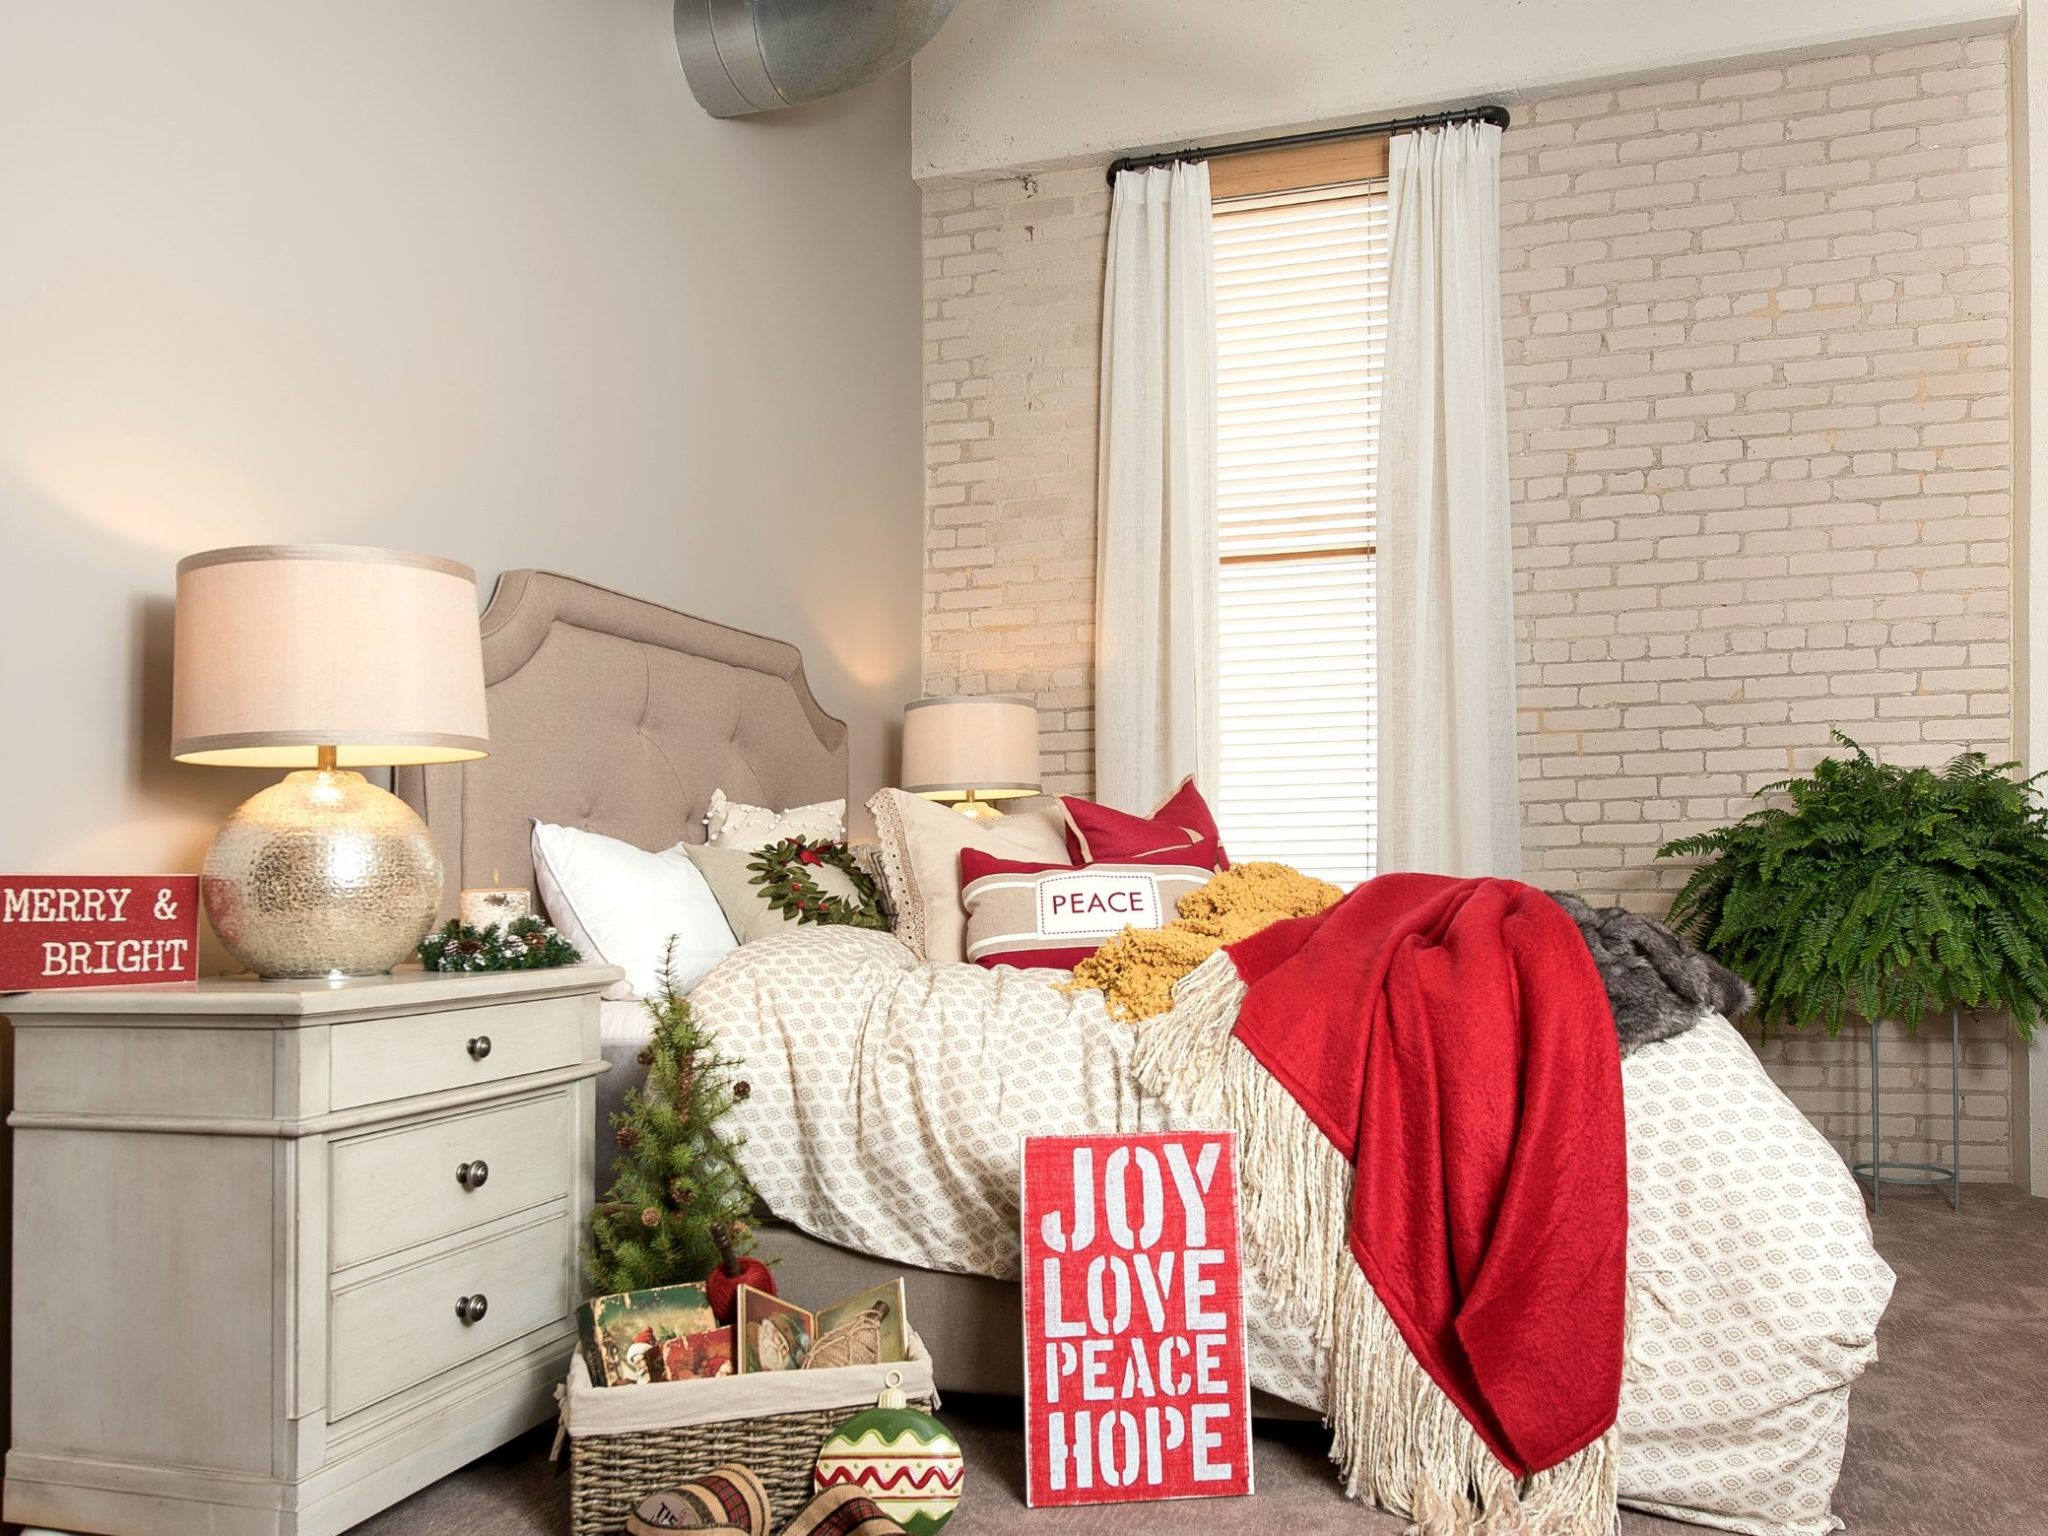 Decorating a holiday guest room